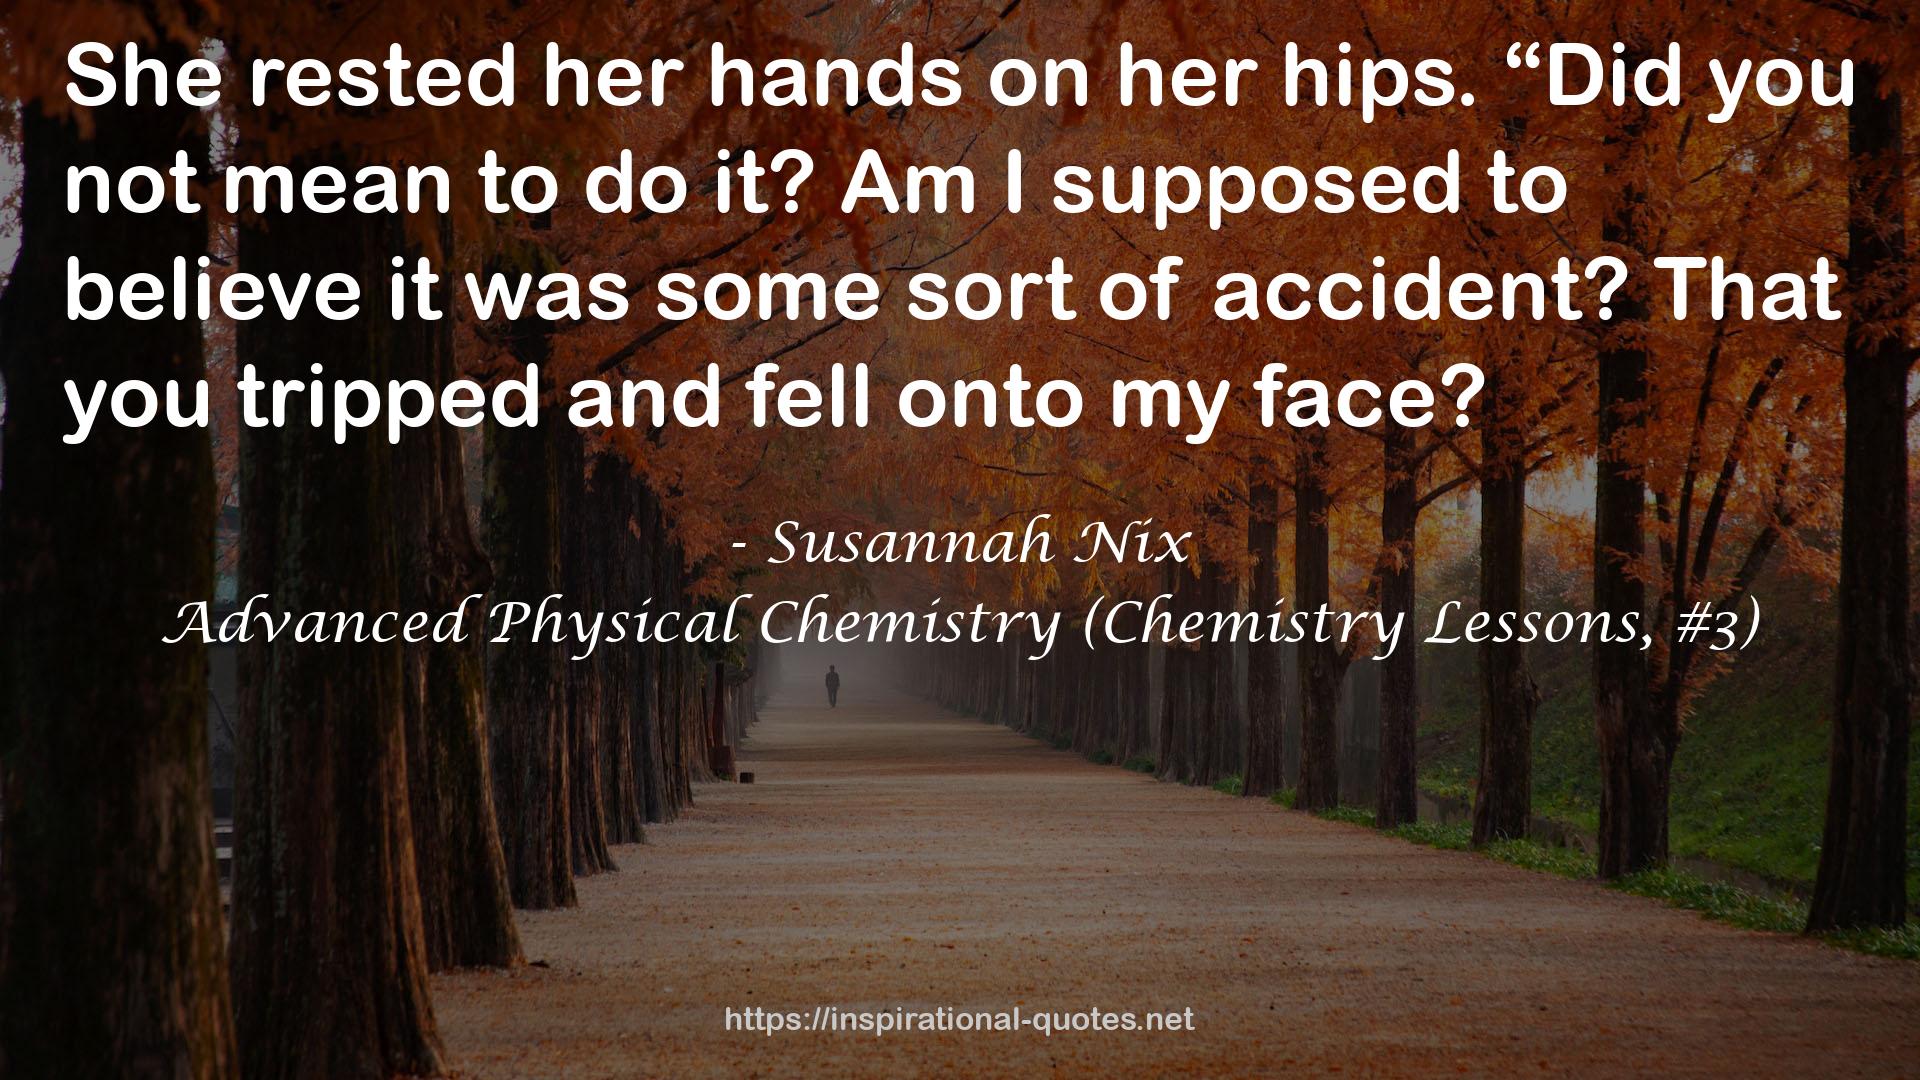 Advanced Physical Chemistry (Chemistry Lessons, #3) QUOTES